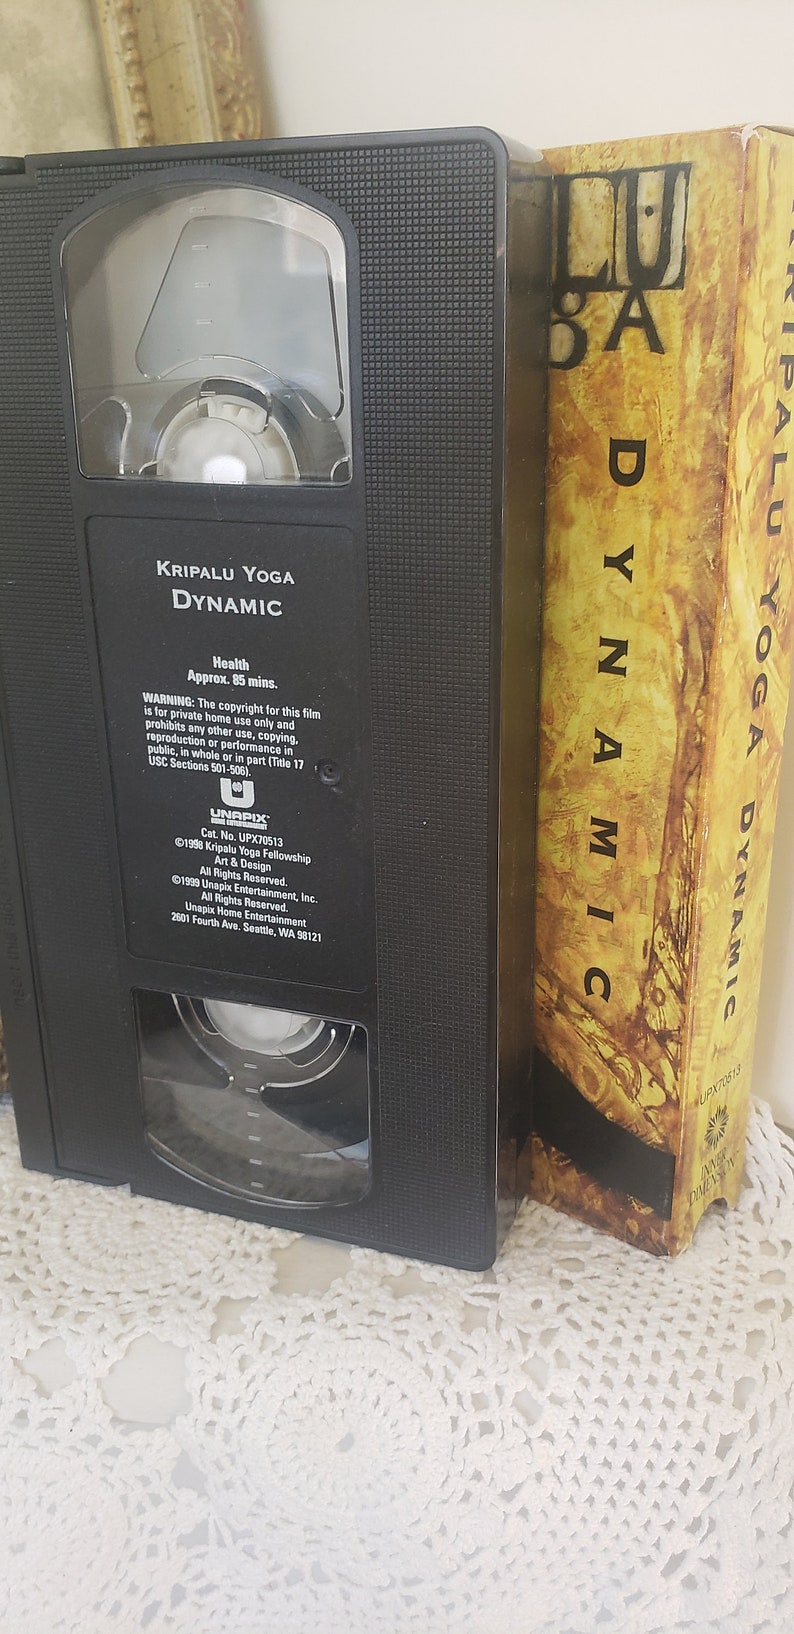 Kripalu Yoga VHS Dynamic Yoga with Stephen Cope Experience the Heart of Yoga Move and Breathe Yoga VHS Practice Yoga At Home VHS image 4